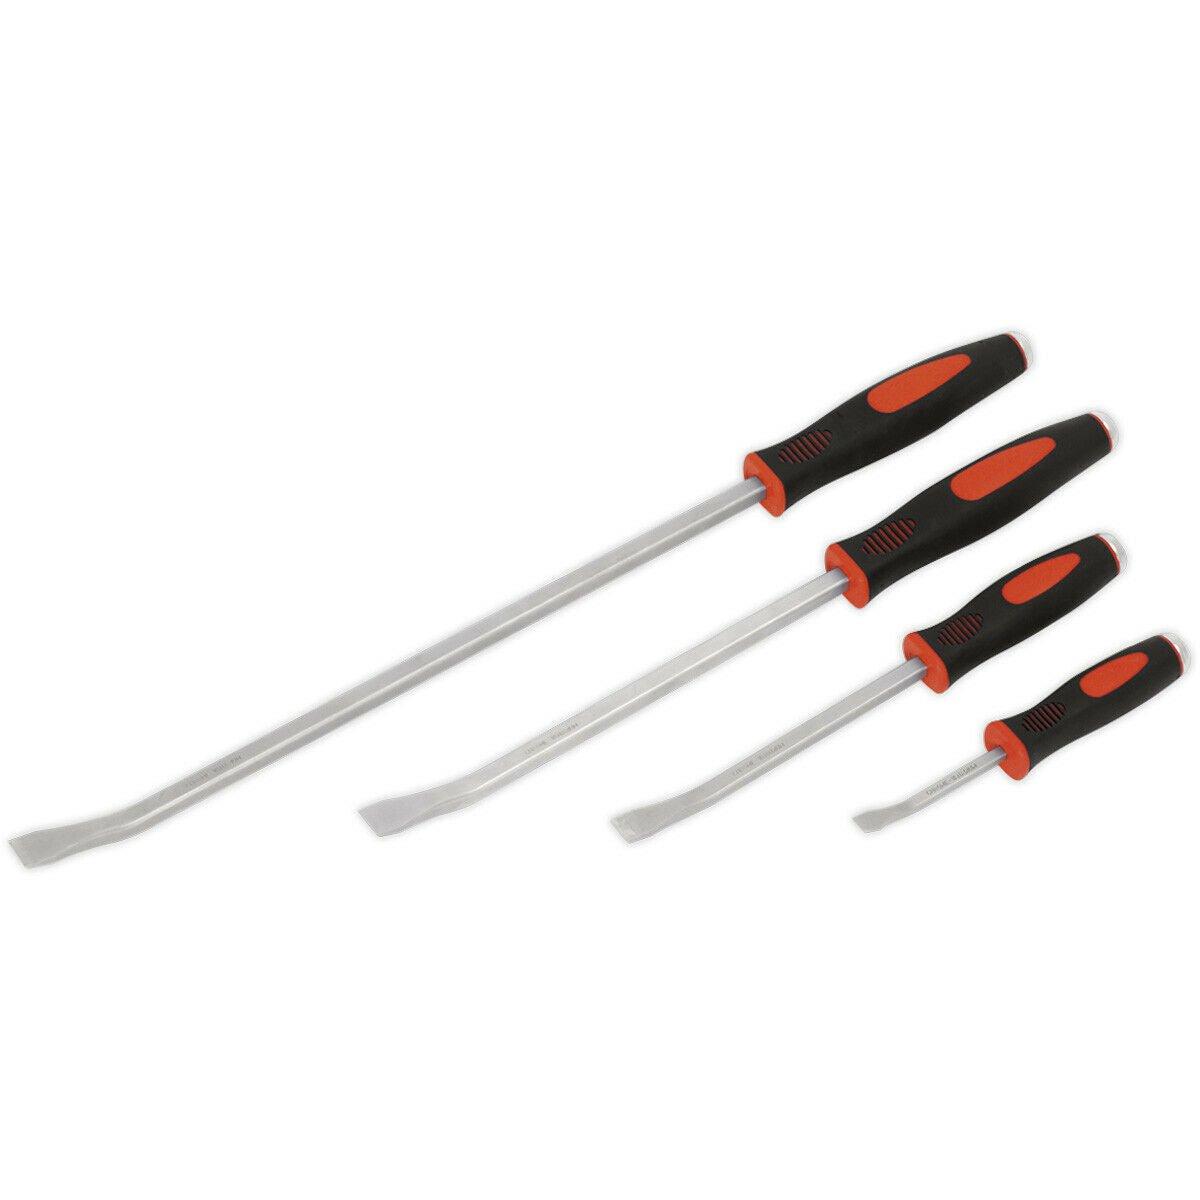 4 Piece Heavy Duty Angled Pry Bar Set - Soft Grip Handles with Hammer Caps